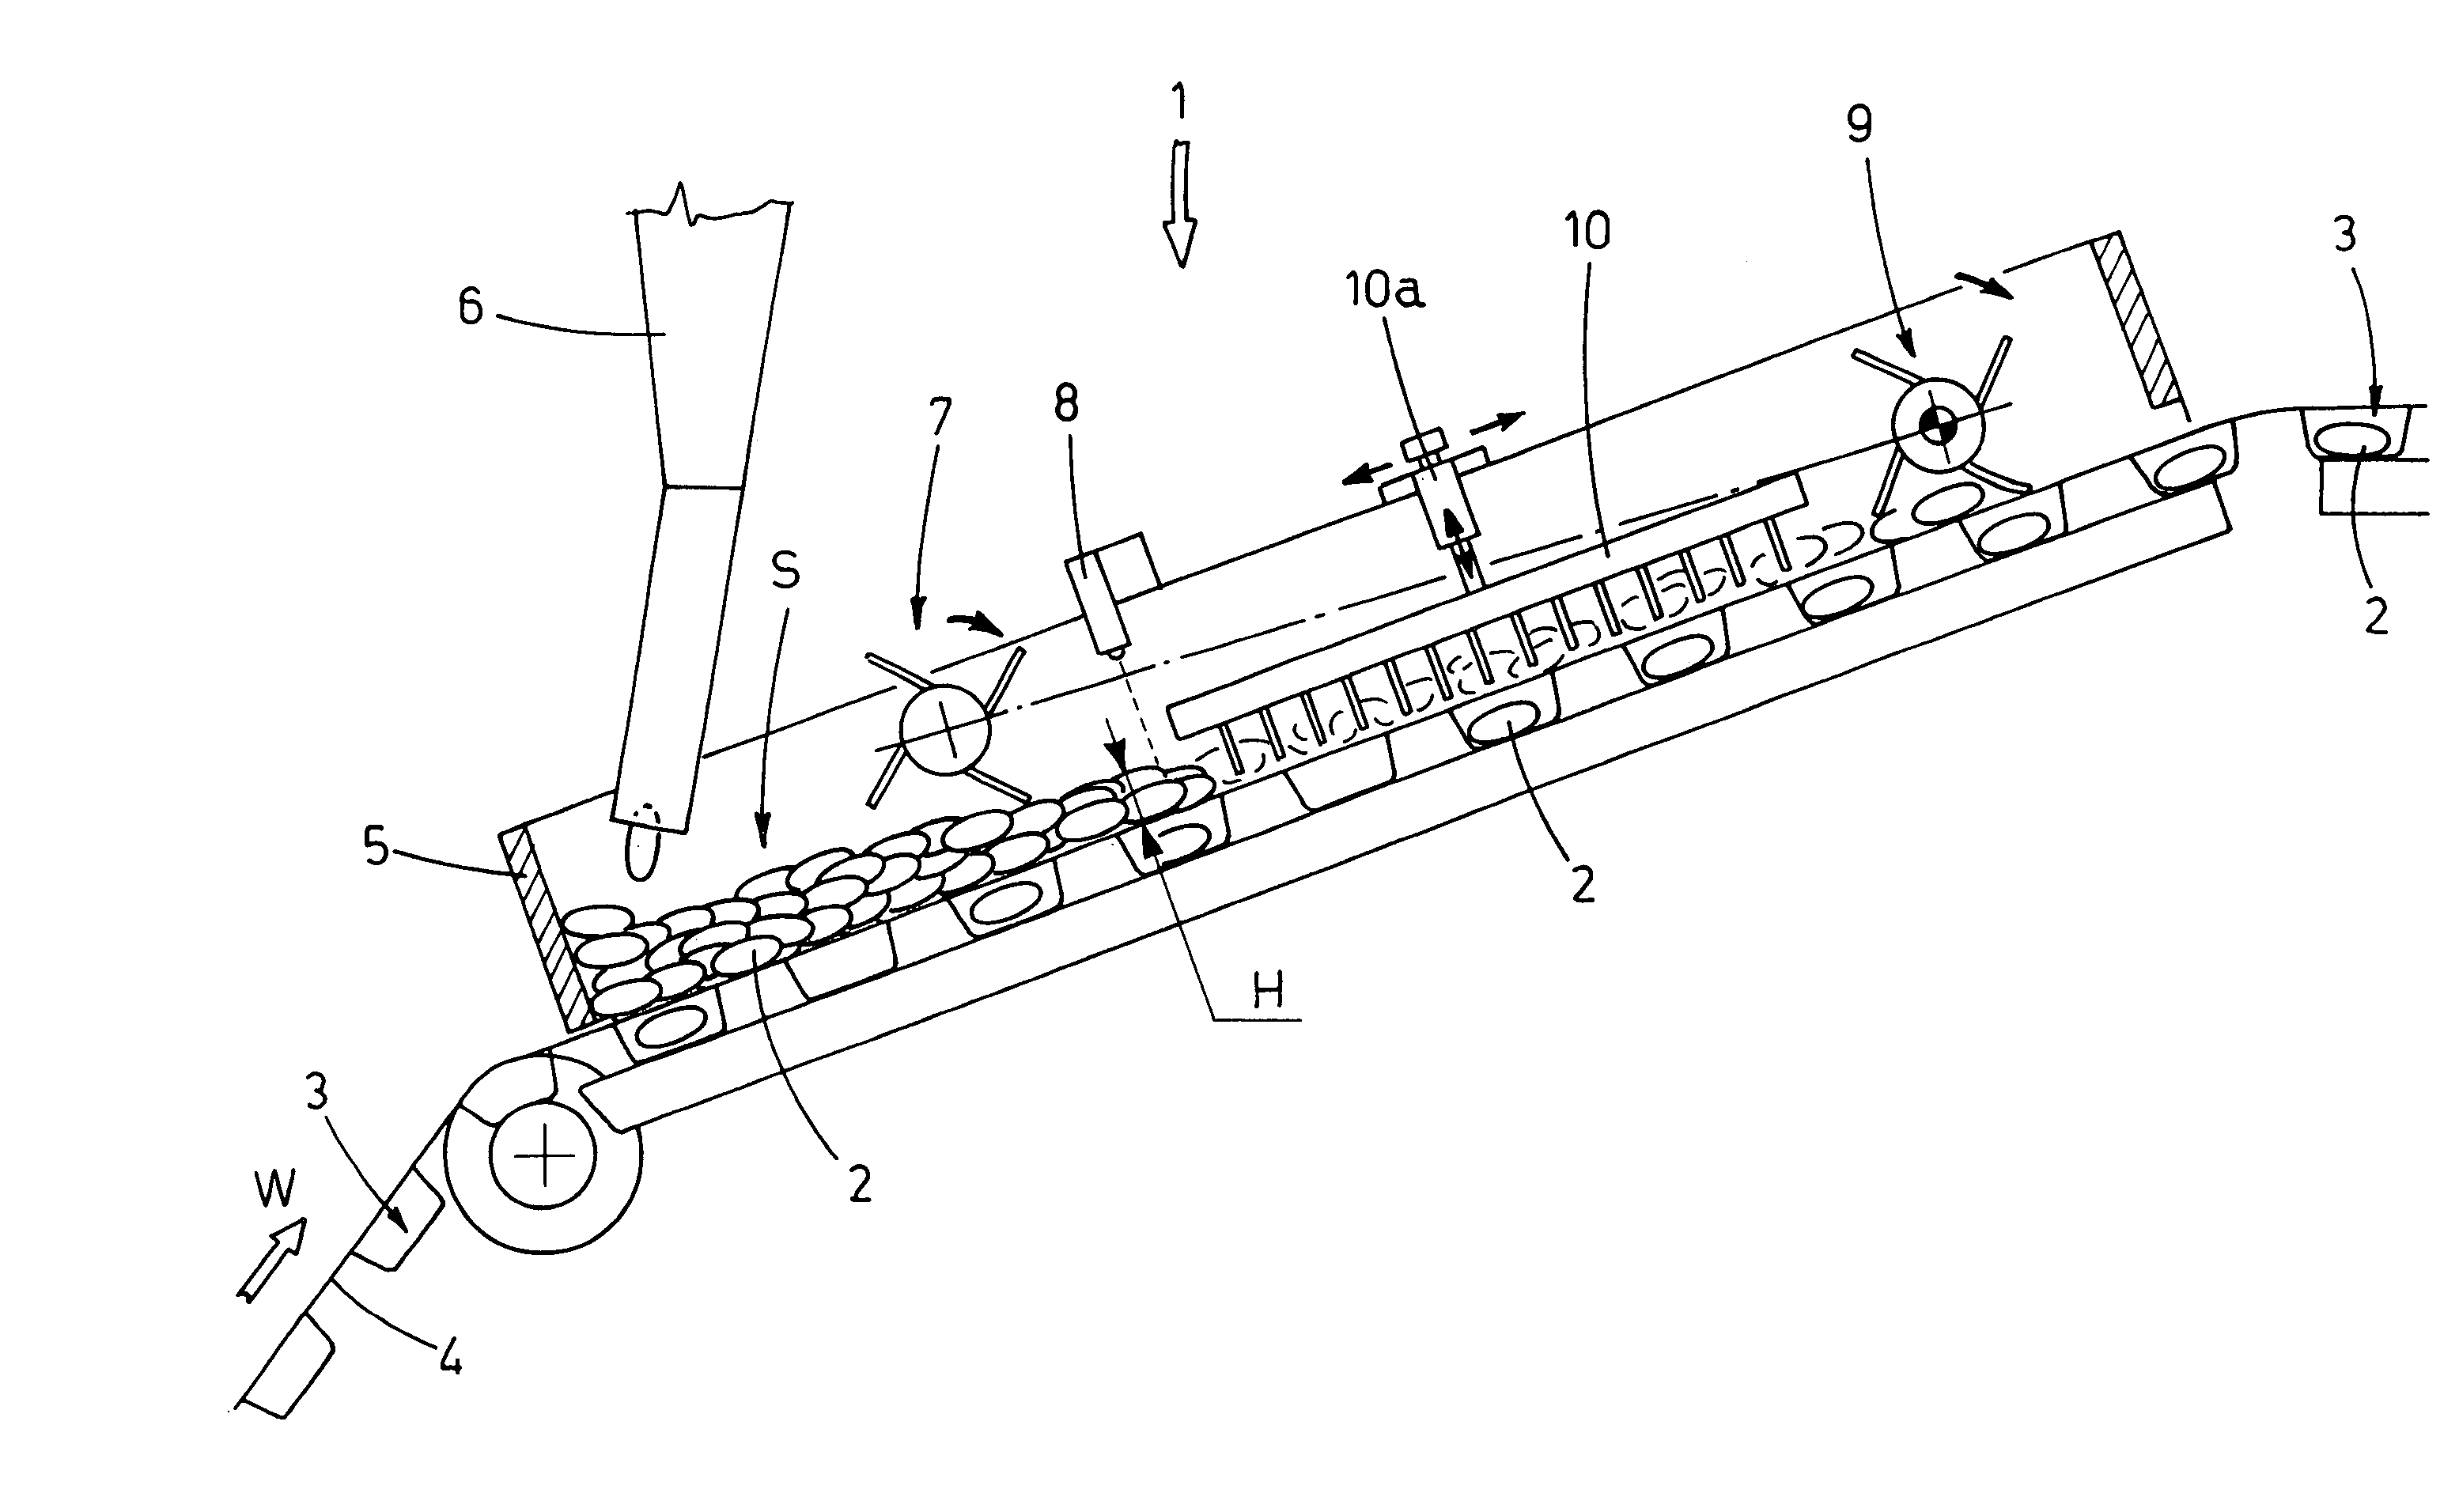 Apparatus for feeding articles to a blister band